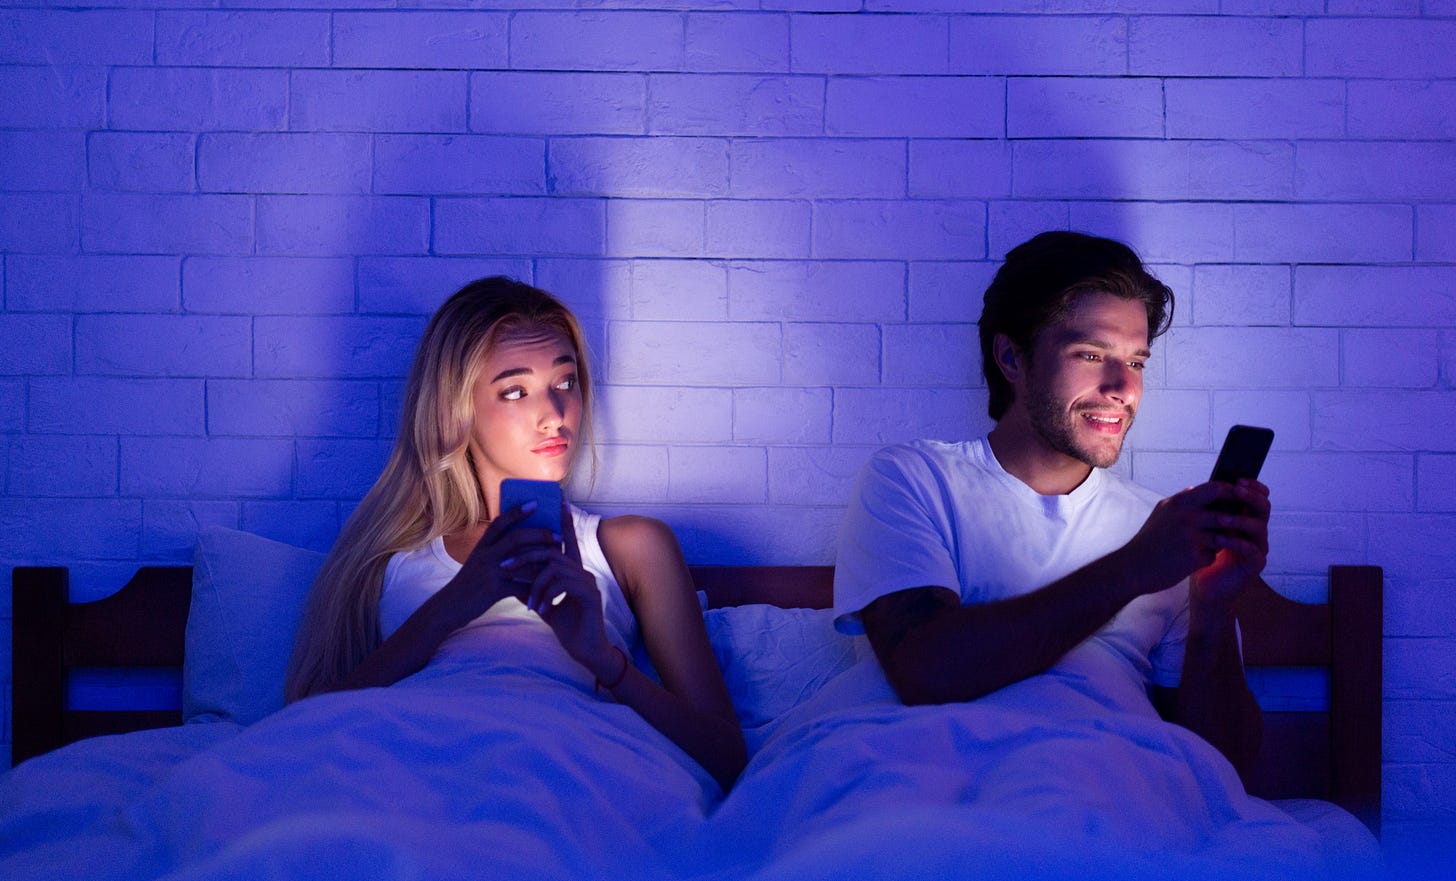 A couple lays in bed with their phones. One partner texts sneakily to the side while the other watches suspiciously.